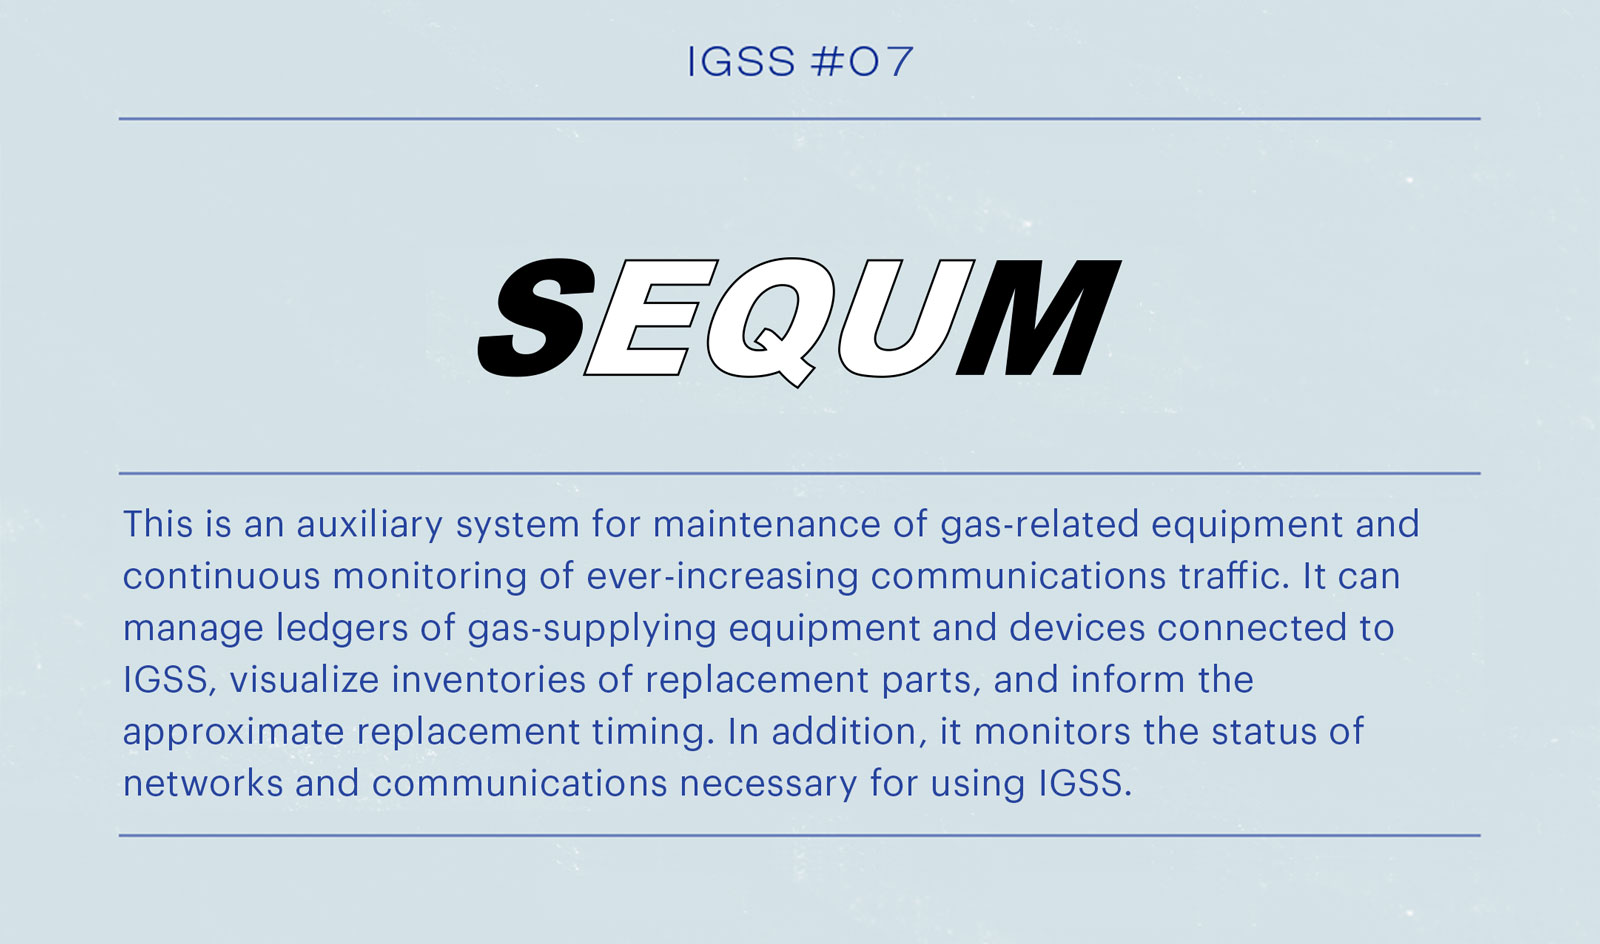 IGSS #07 SEQUM This is the auxiliary system for maintenance management of gas-related facilities and constant monitoring of ever-increasing communication traffic. It can manage the ledgers of gas supply facilities and equipment connected by IGSS, visualize the inventory of replacement parts, and notify when it is time to replace them. The system also monitors the network and communication status necessary to use IGSS.